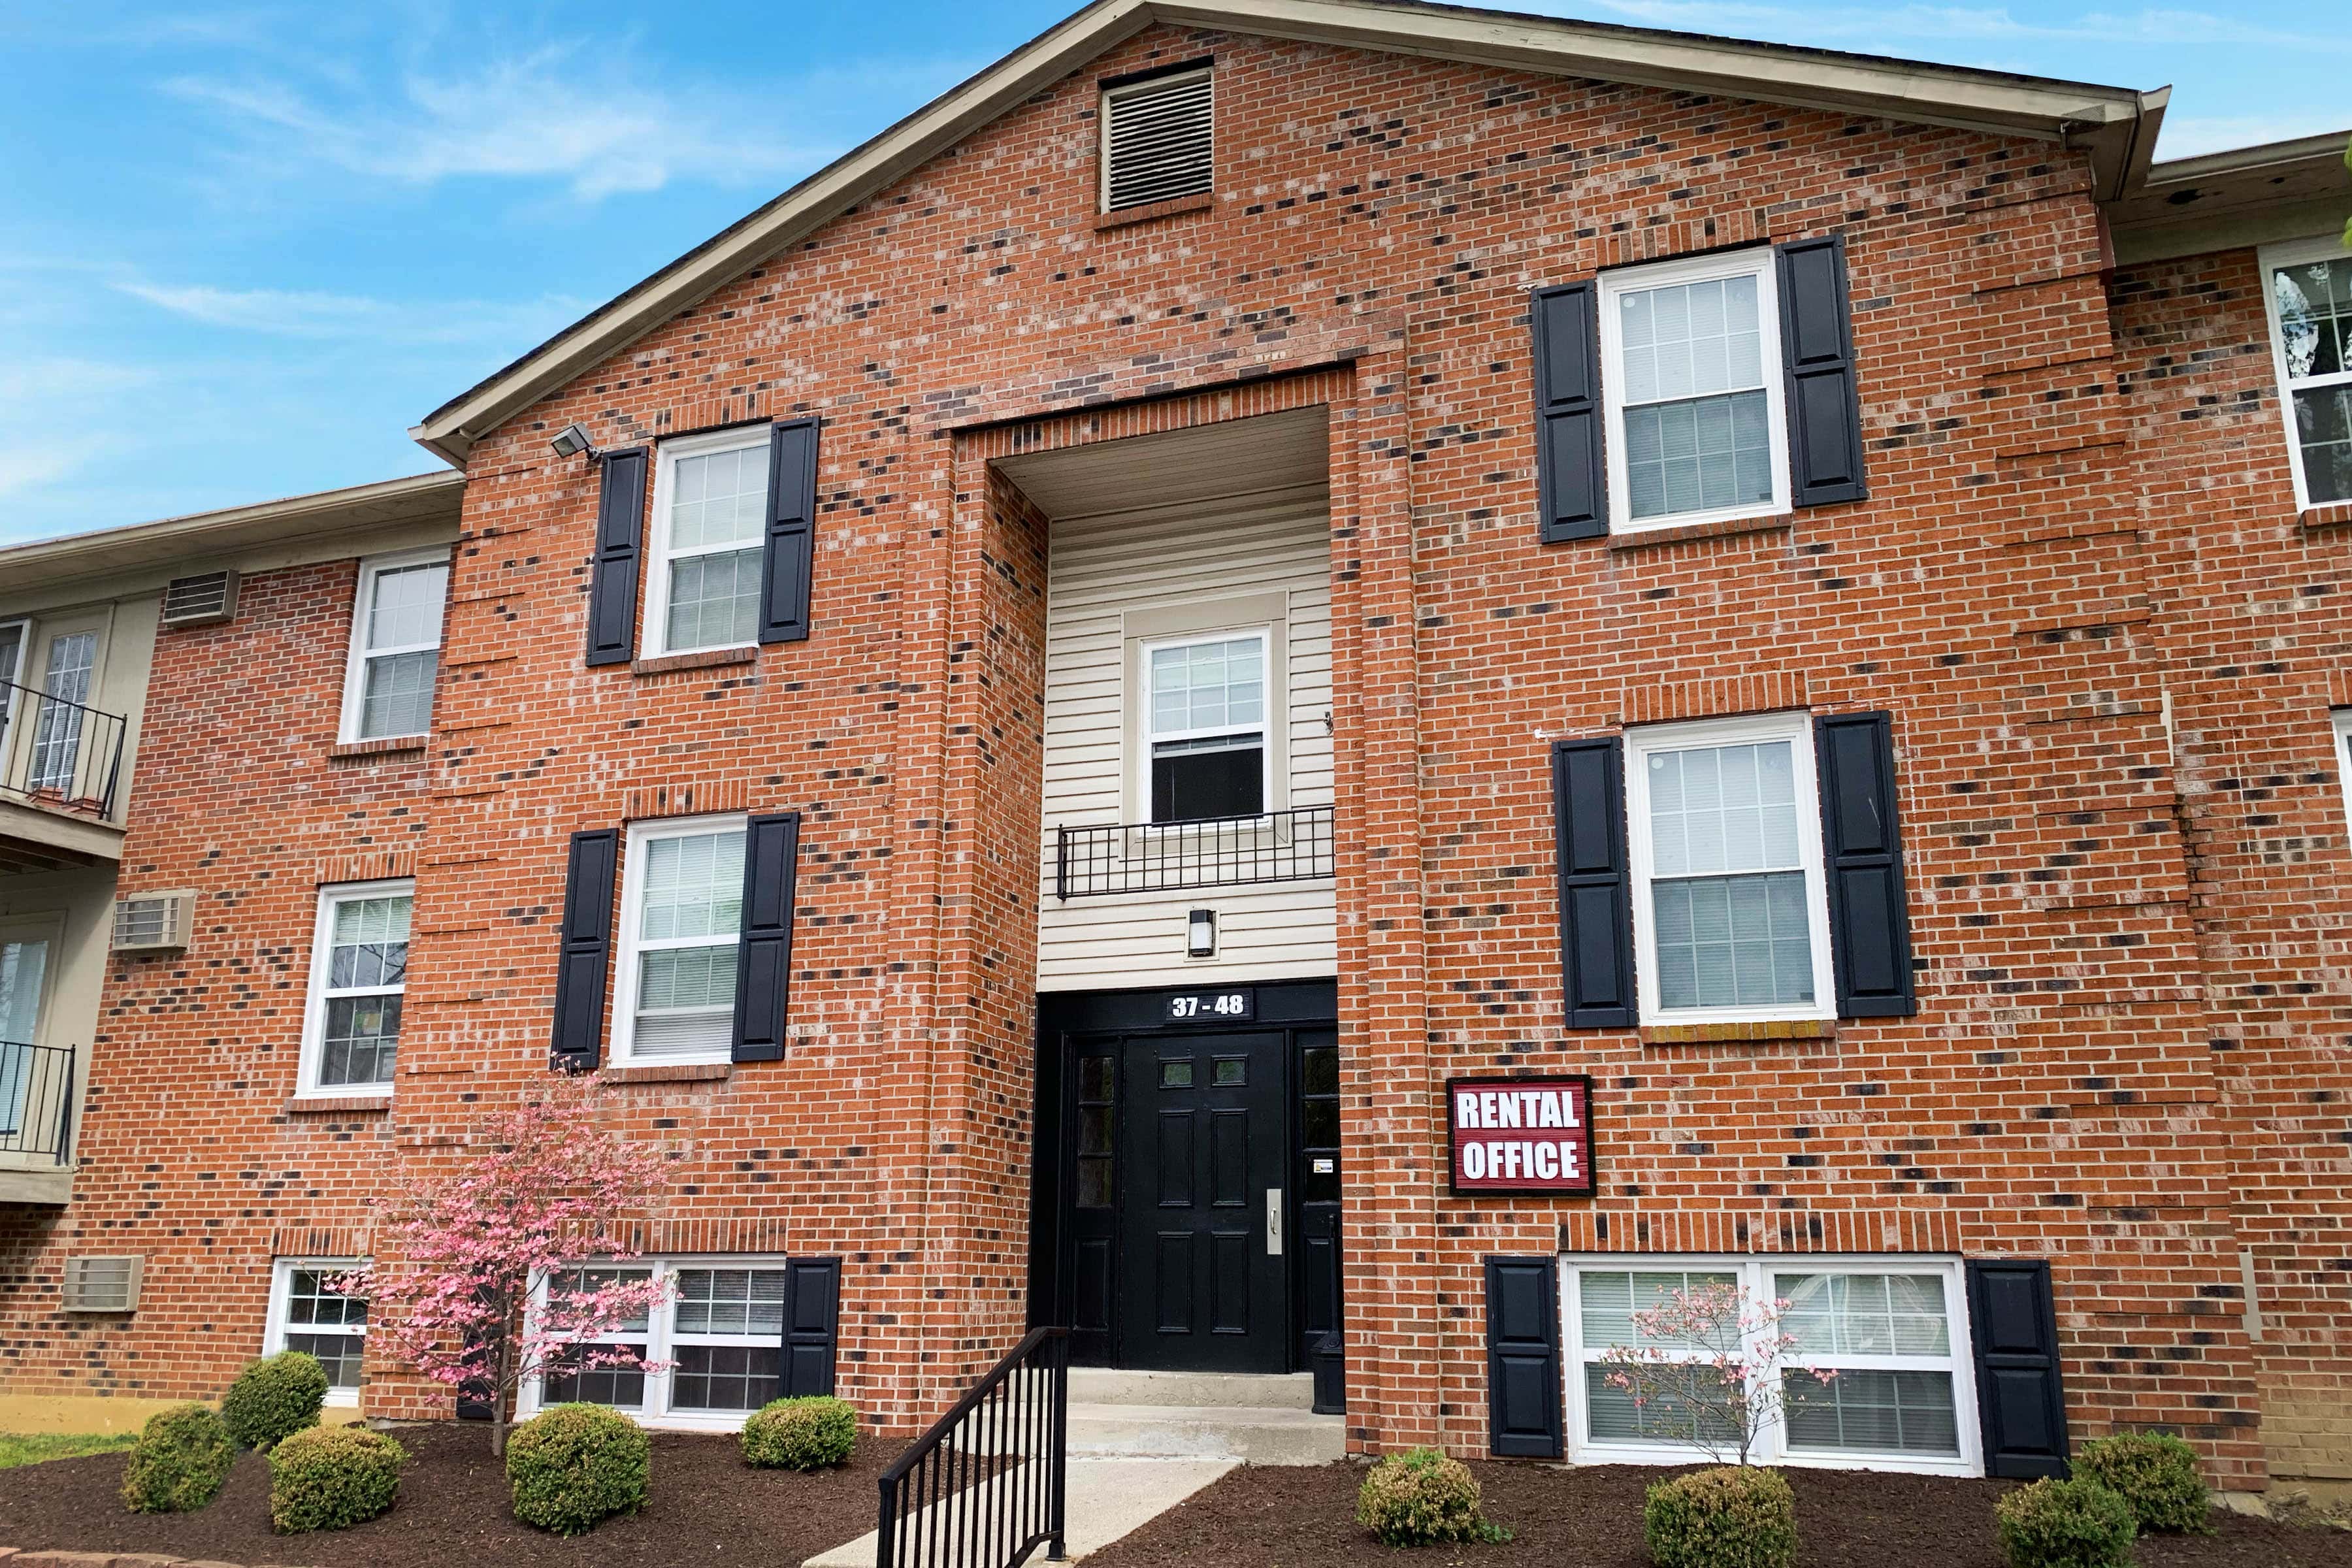 Concord Woods Apartments - Milford, OH, US, 2 bedroom apartments